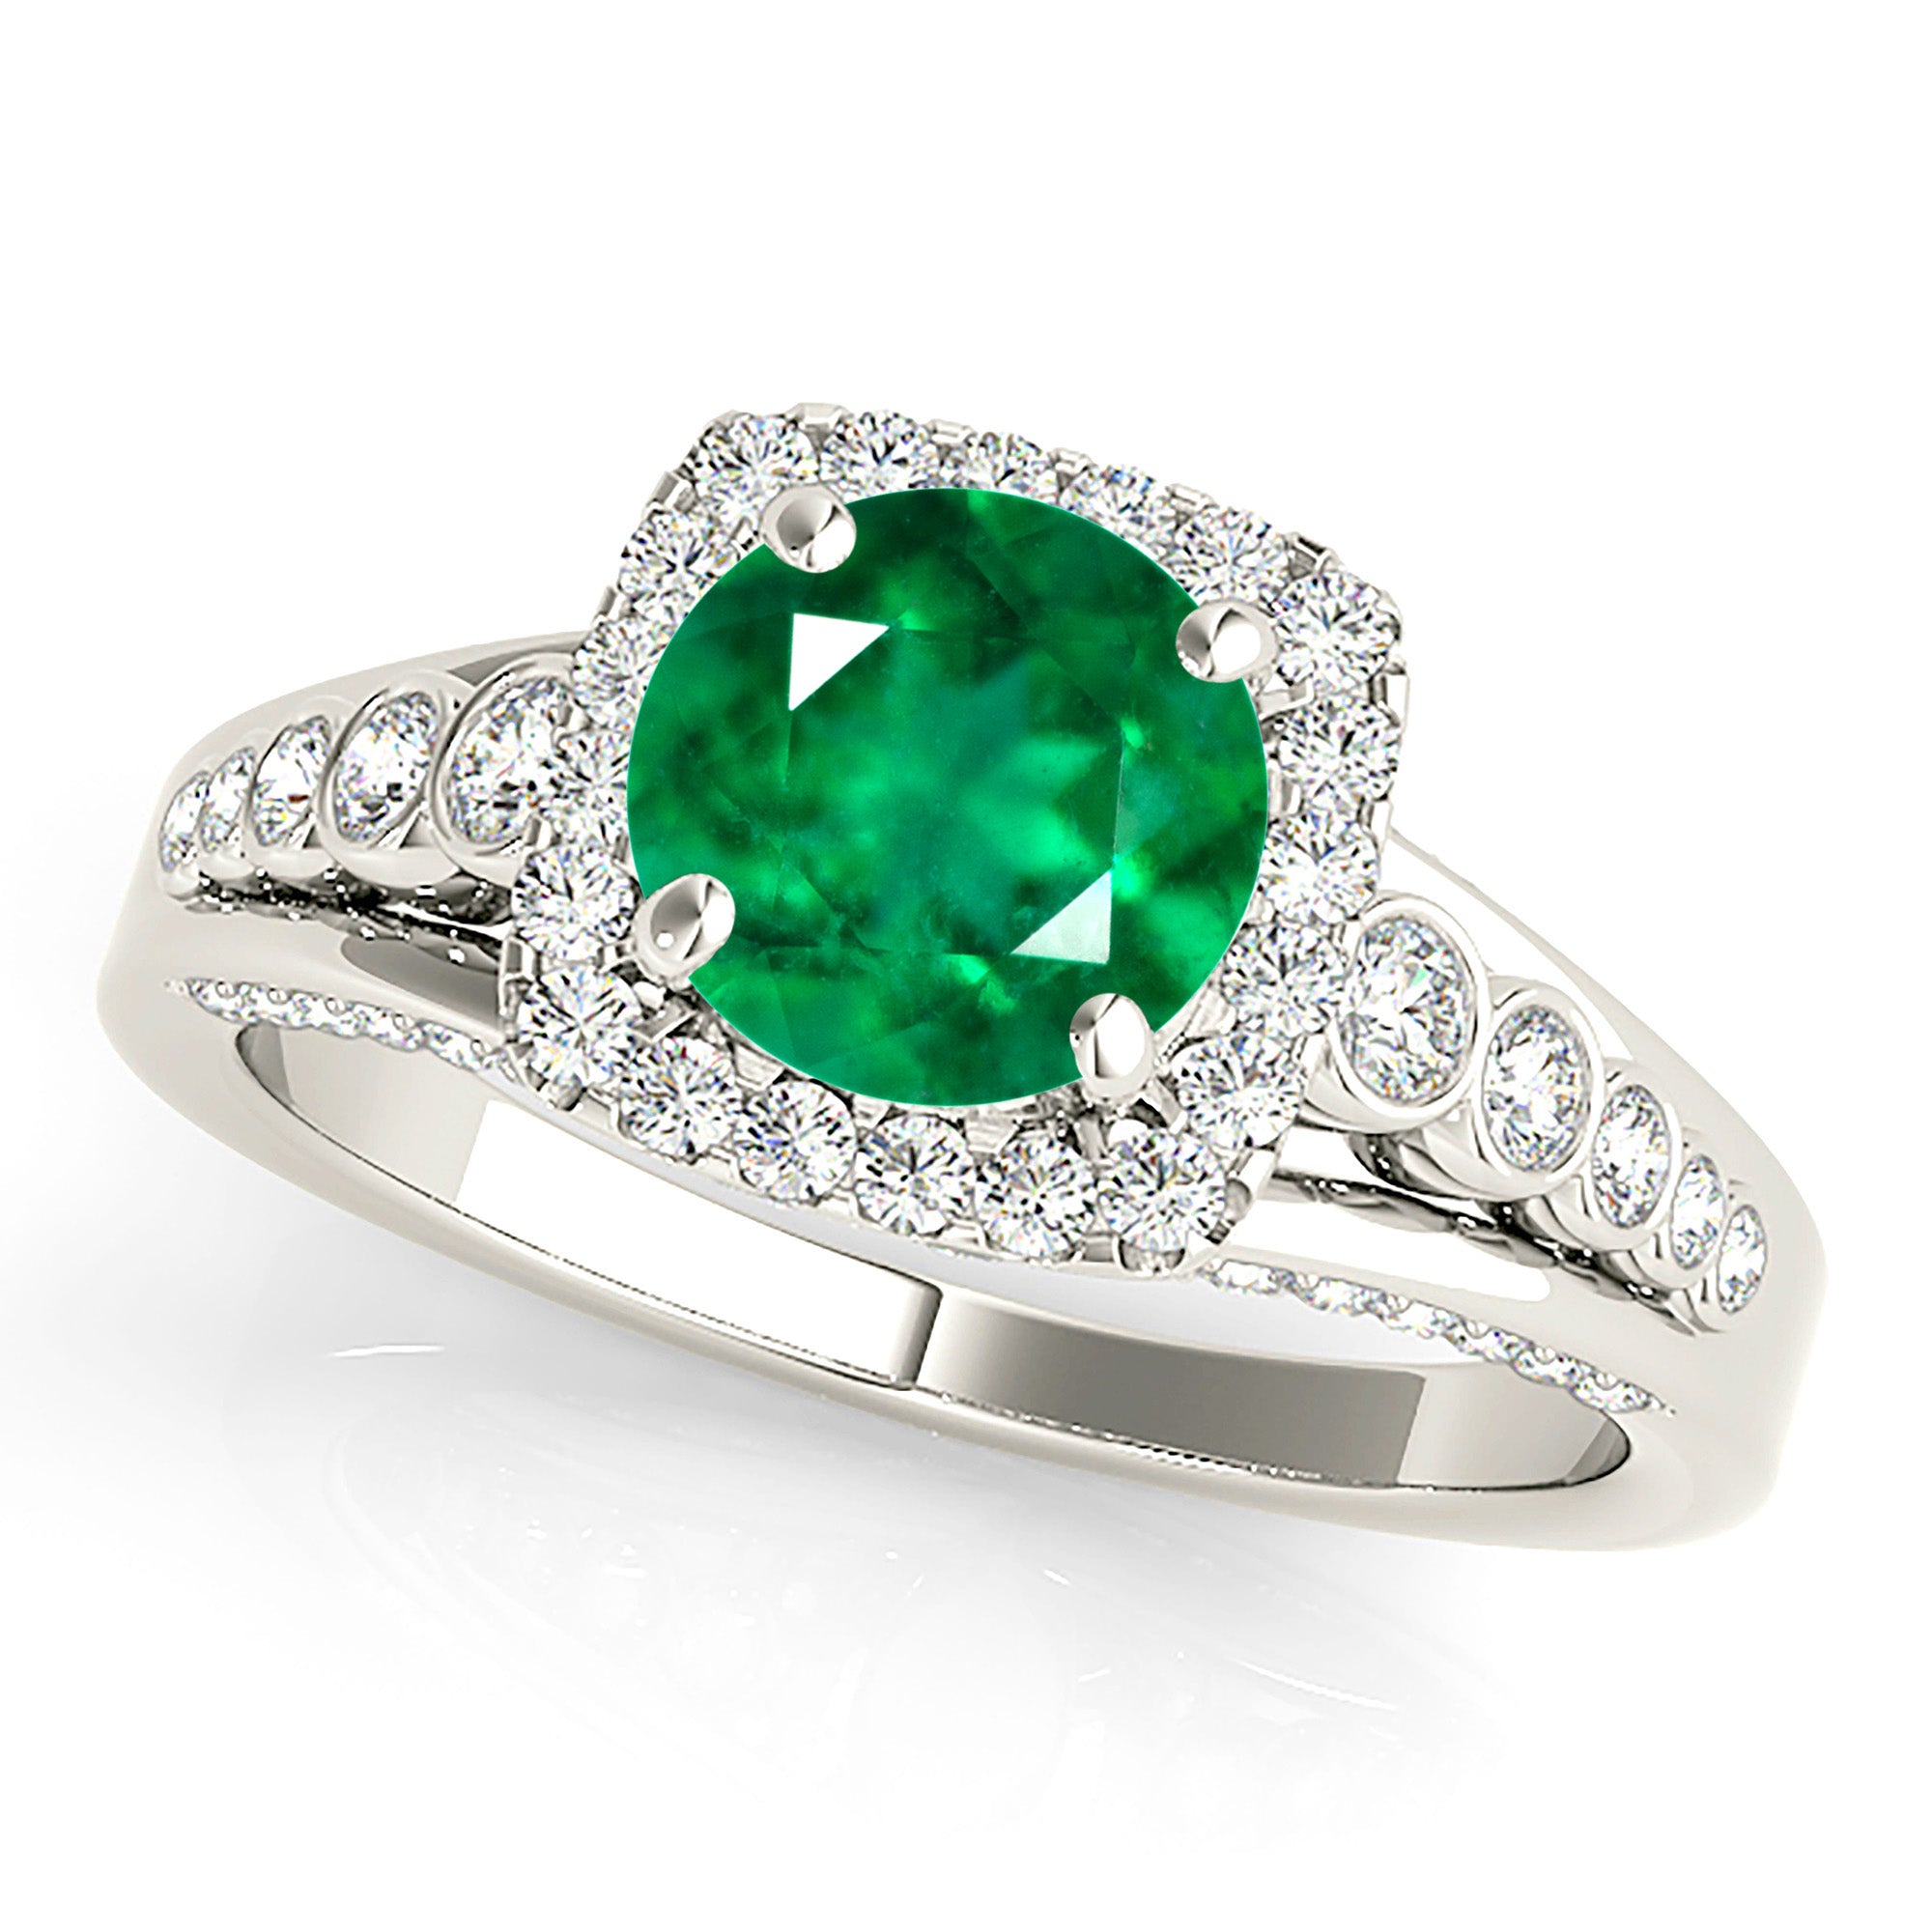 1.75 ct. Genuine Emerald Split Shank Halo Ring With 0.70 ctw. Pave and Bezel Set Side Diamonds-in 14K/18K White, Yellow, Rose Gold and Platinum - Christmas Jewelry Gift -VIRABYANI